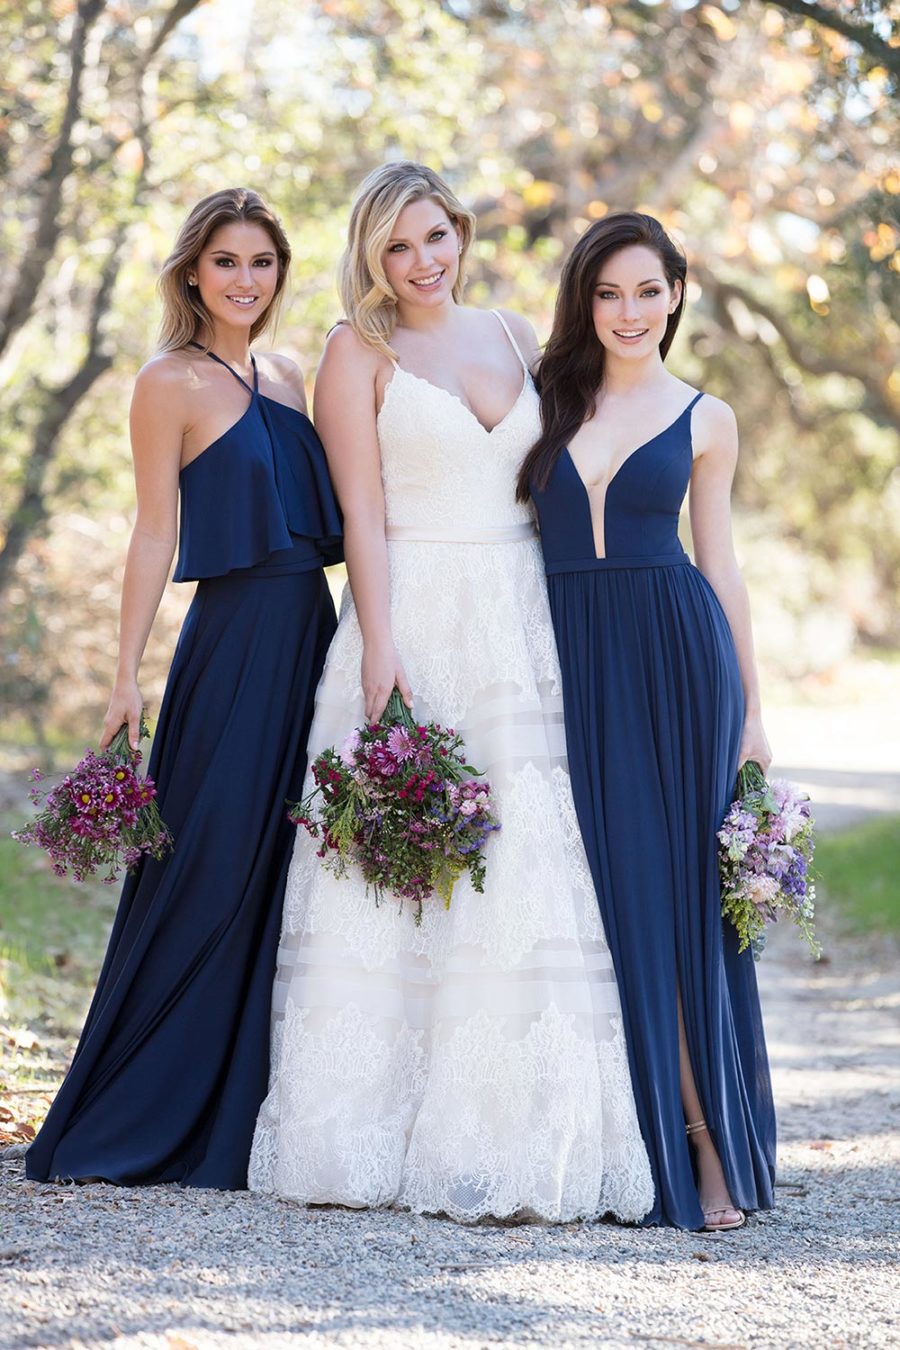 Summer Vibes with these Flowy Gowns from Allure Bridals ⋆ Ruffled